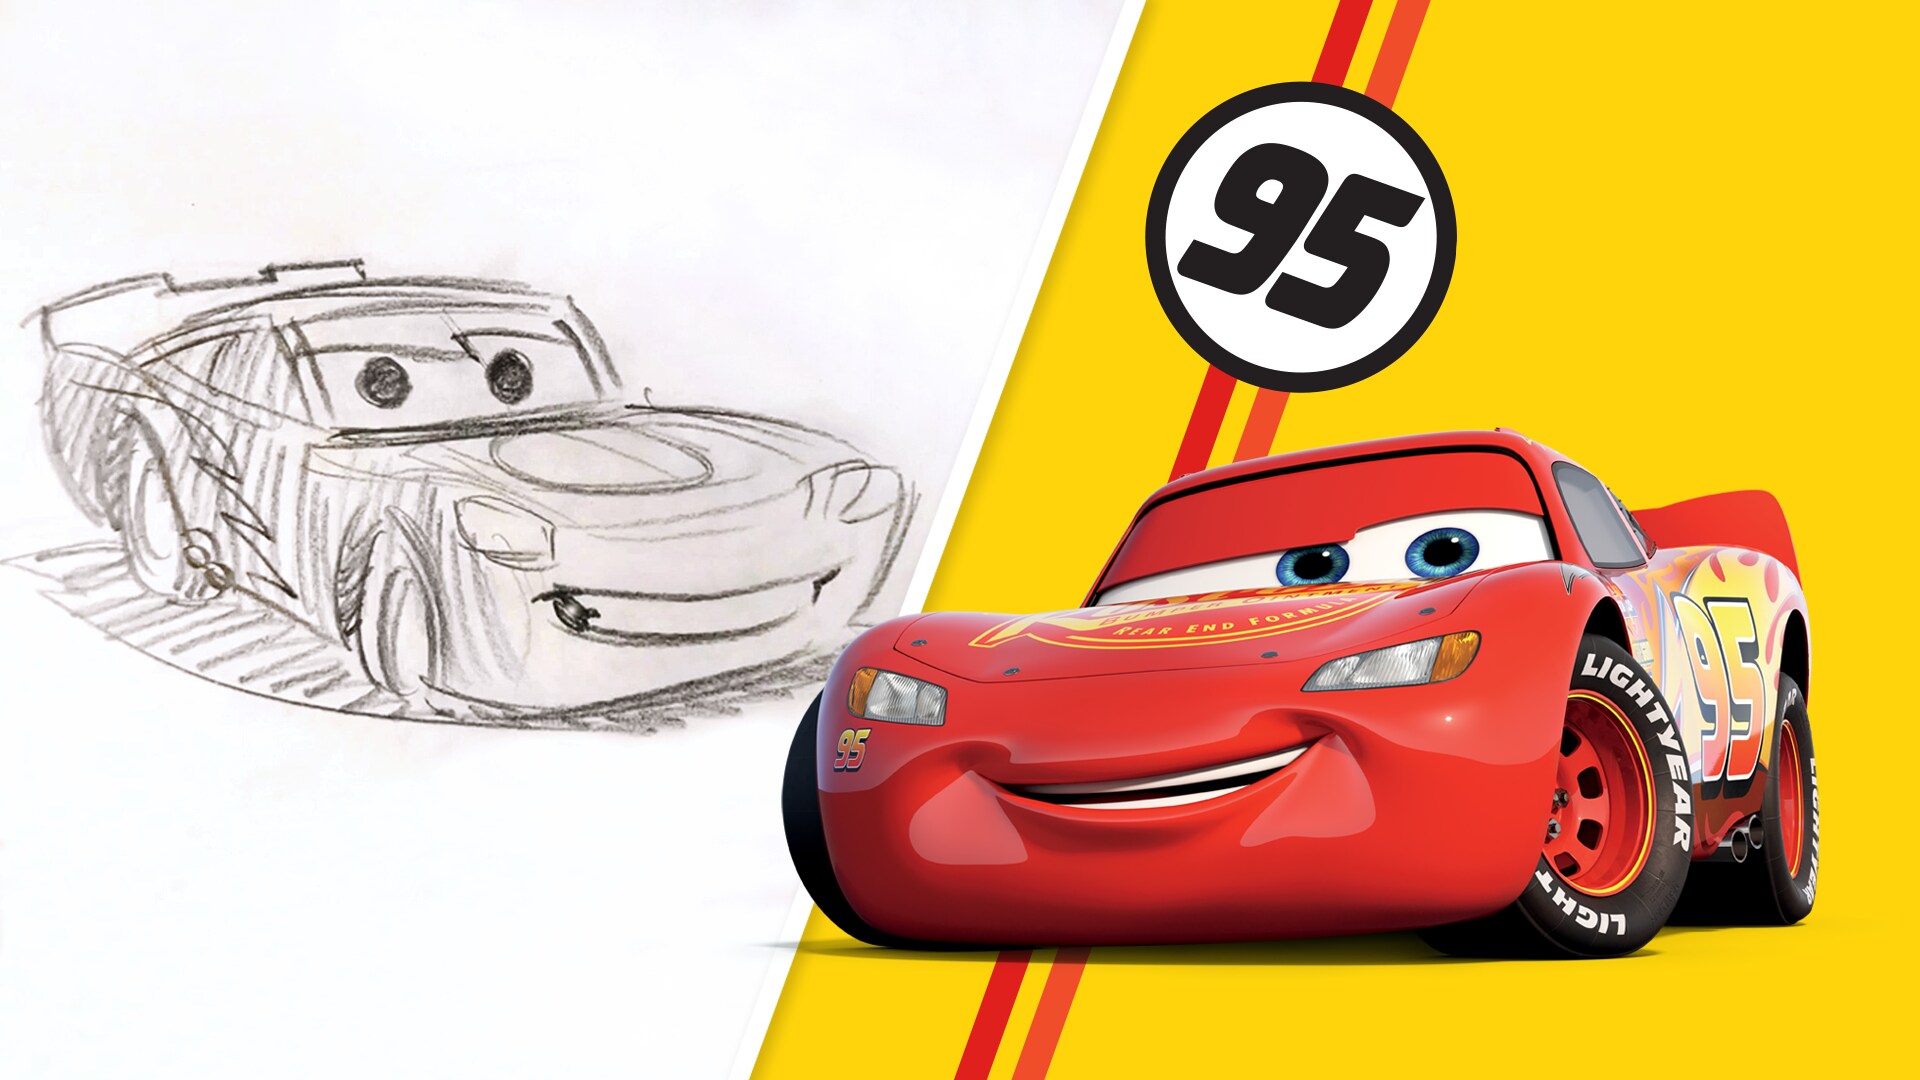 Learn to Draw Lightning McQueen and Mater From Cars!